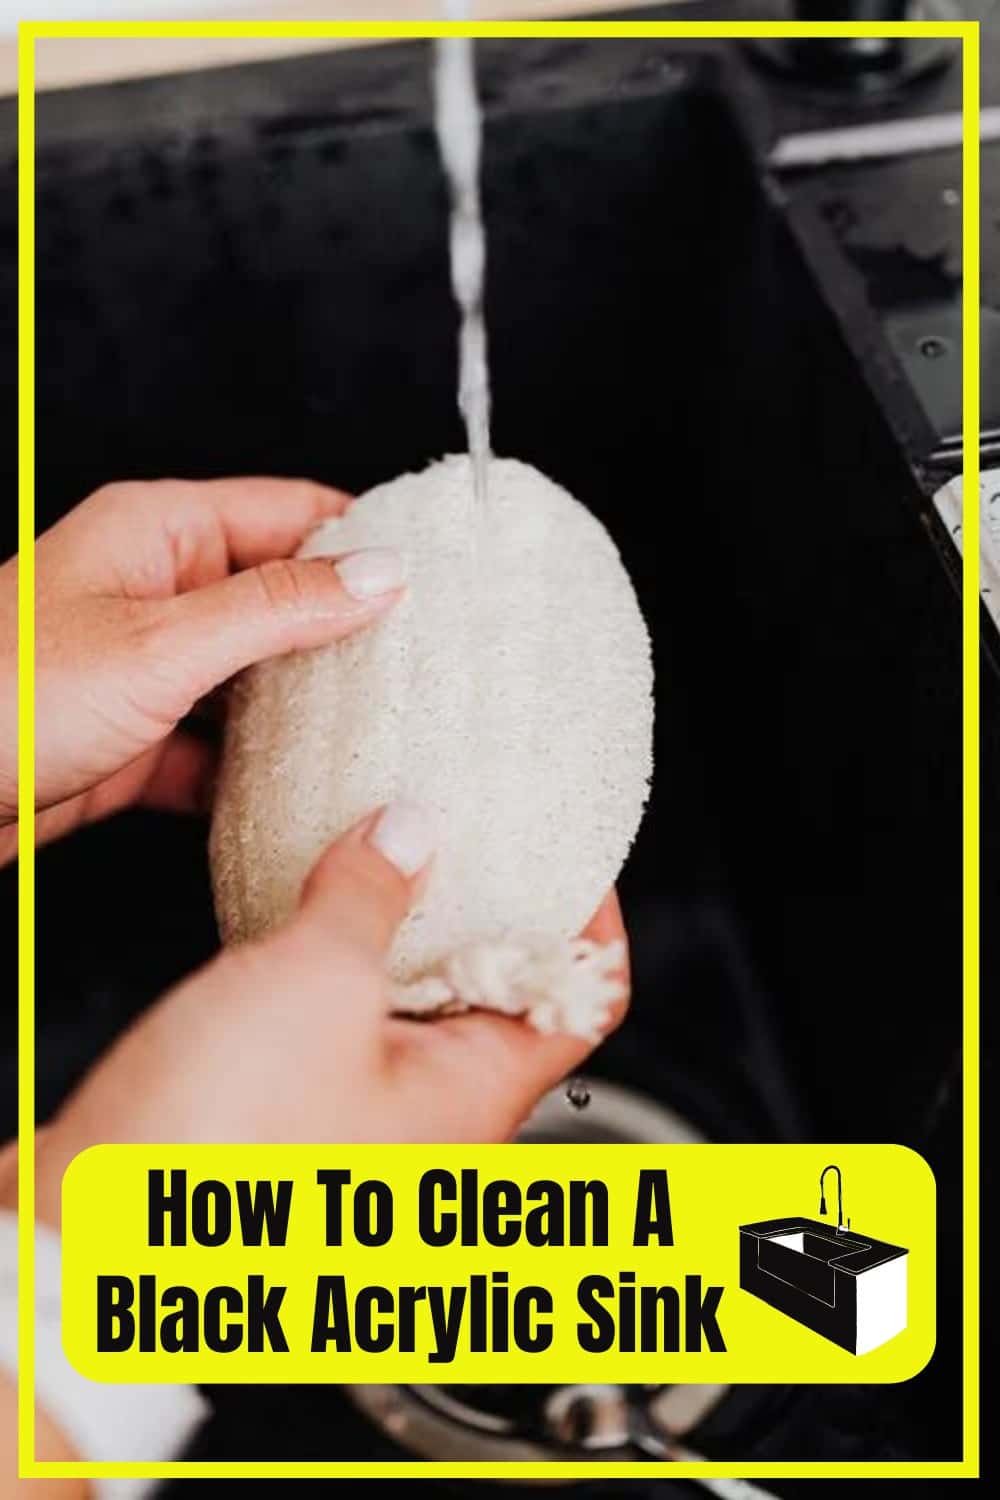 Use a soft sponge and some vinegar to clean a black acrylic sink